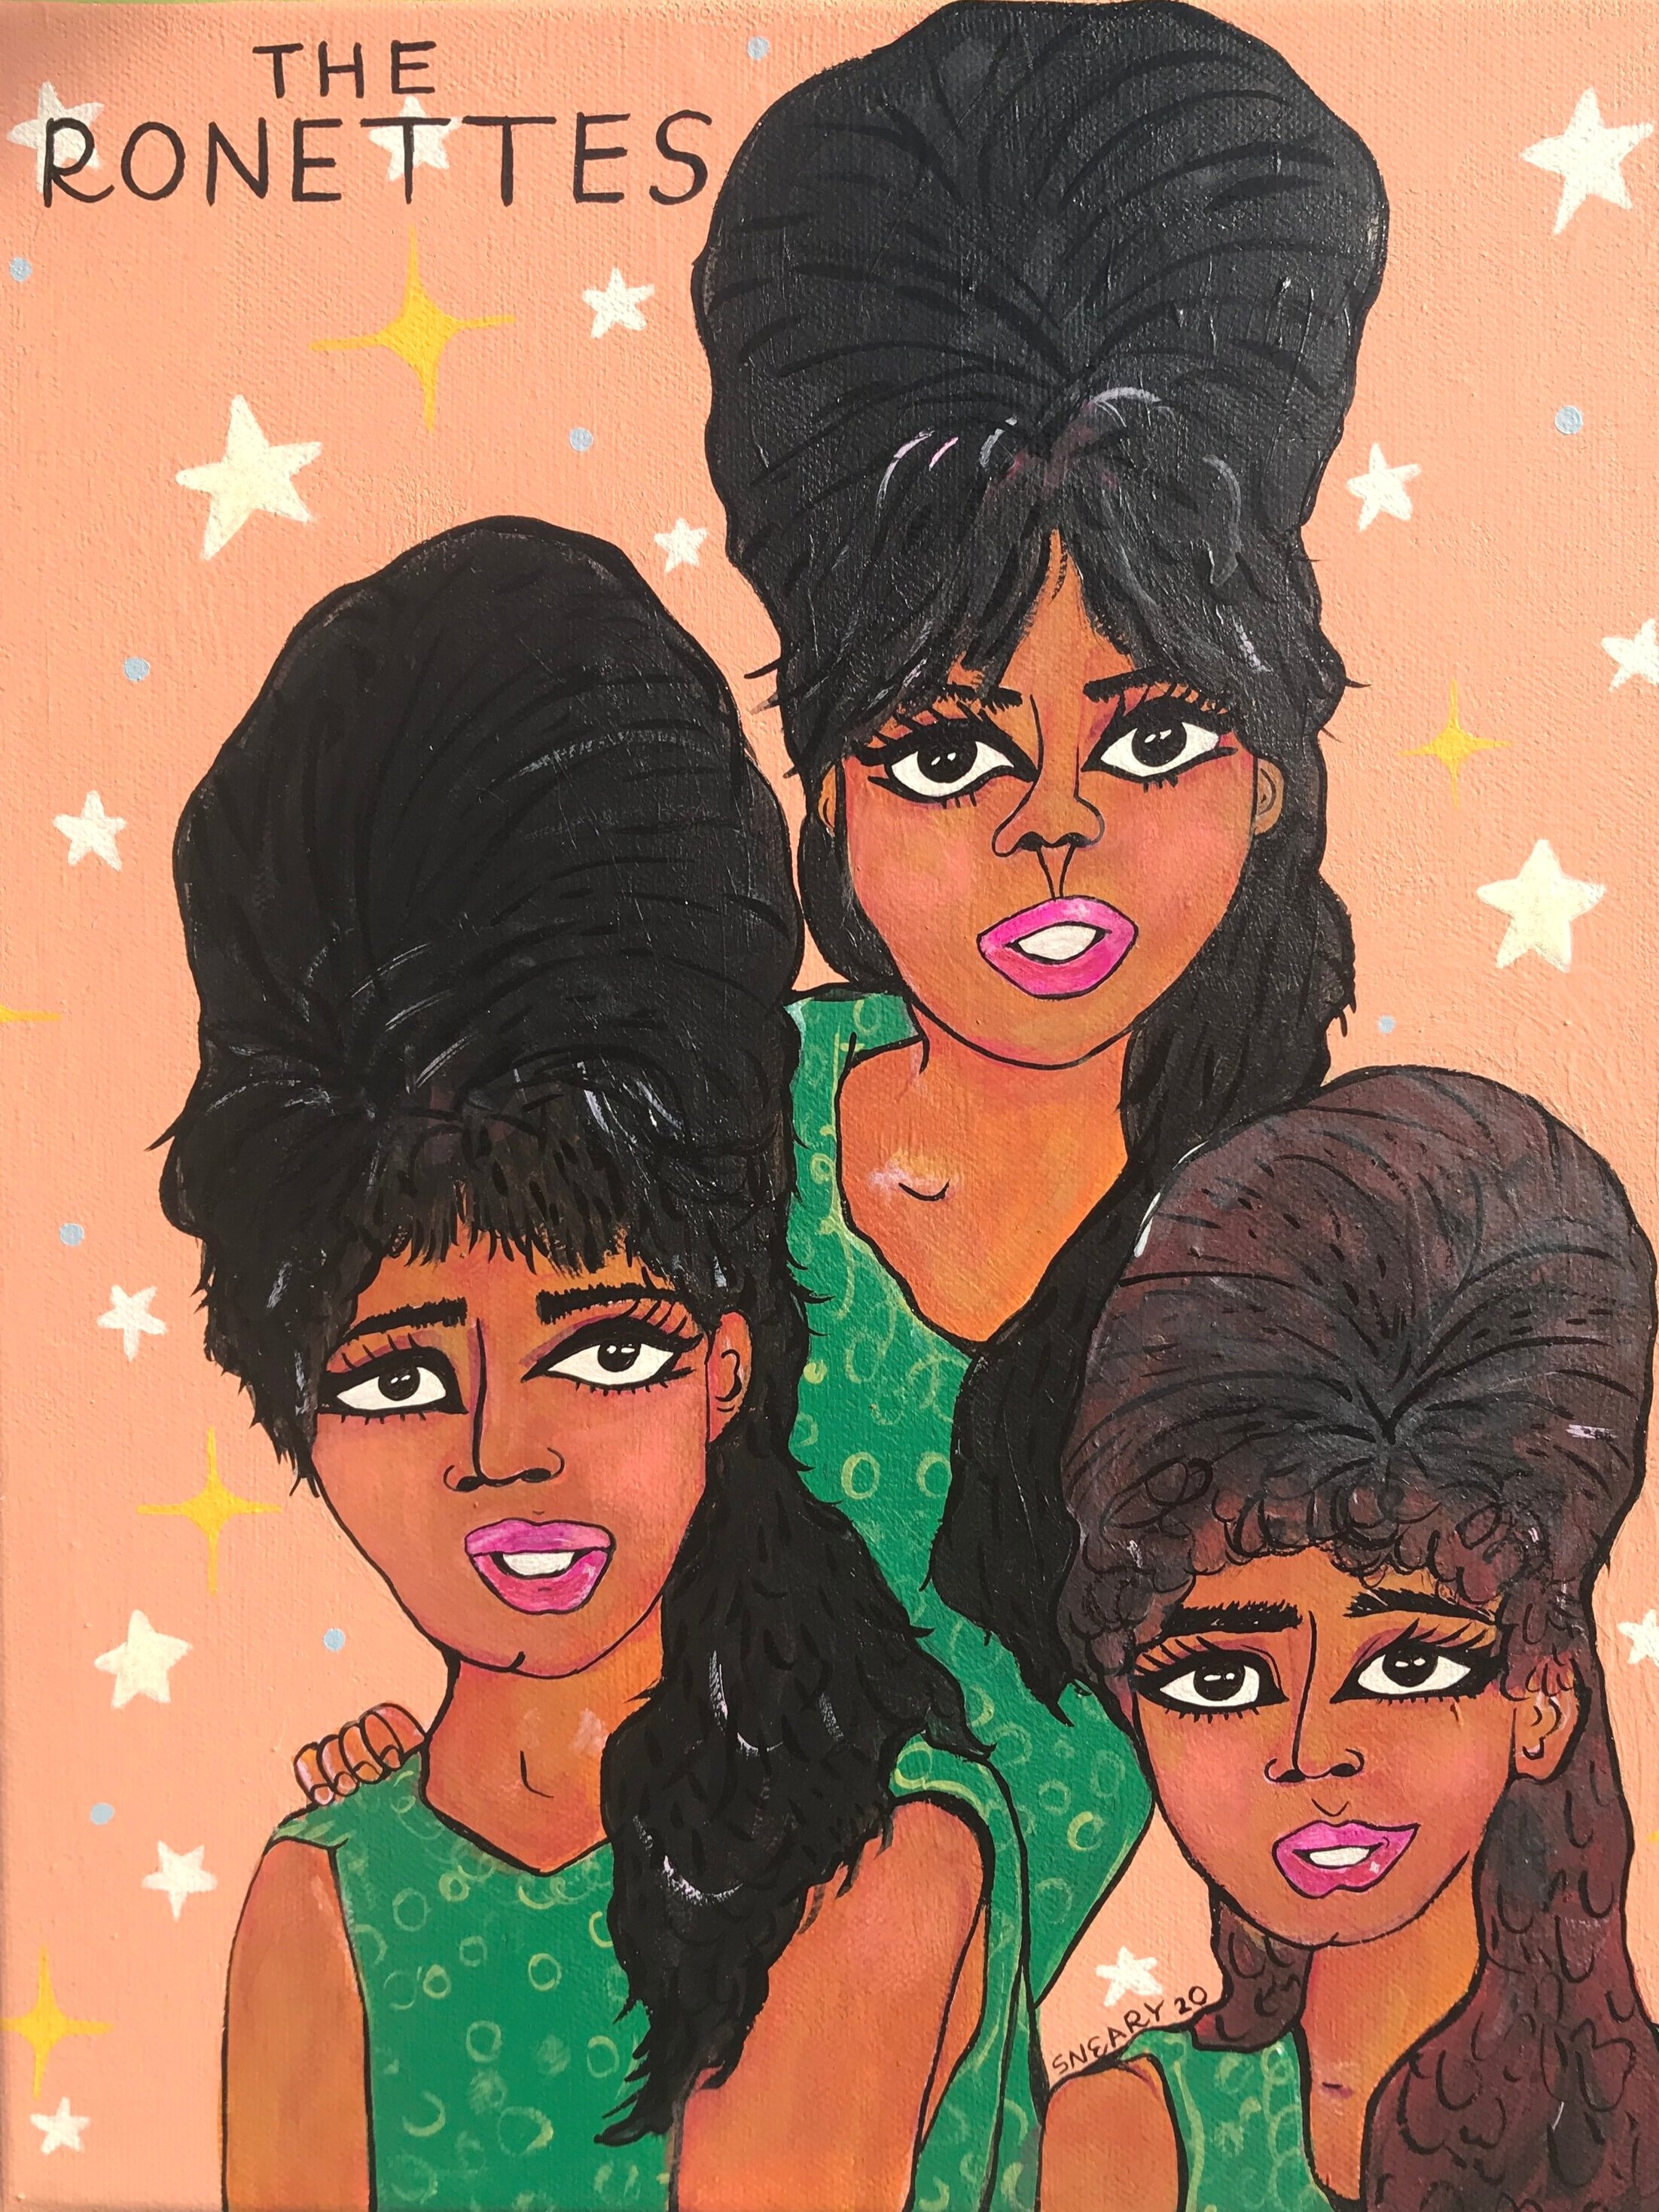 "Ode to The Ronettes"